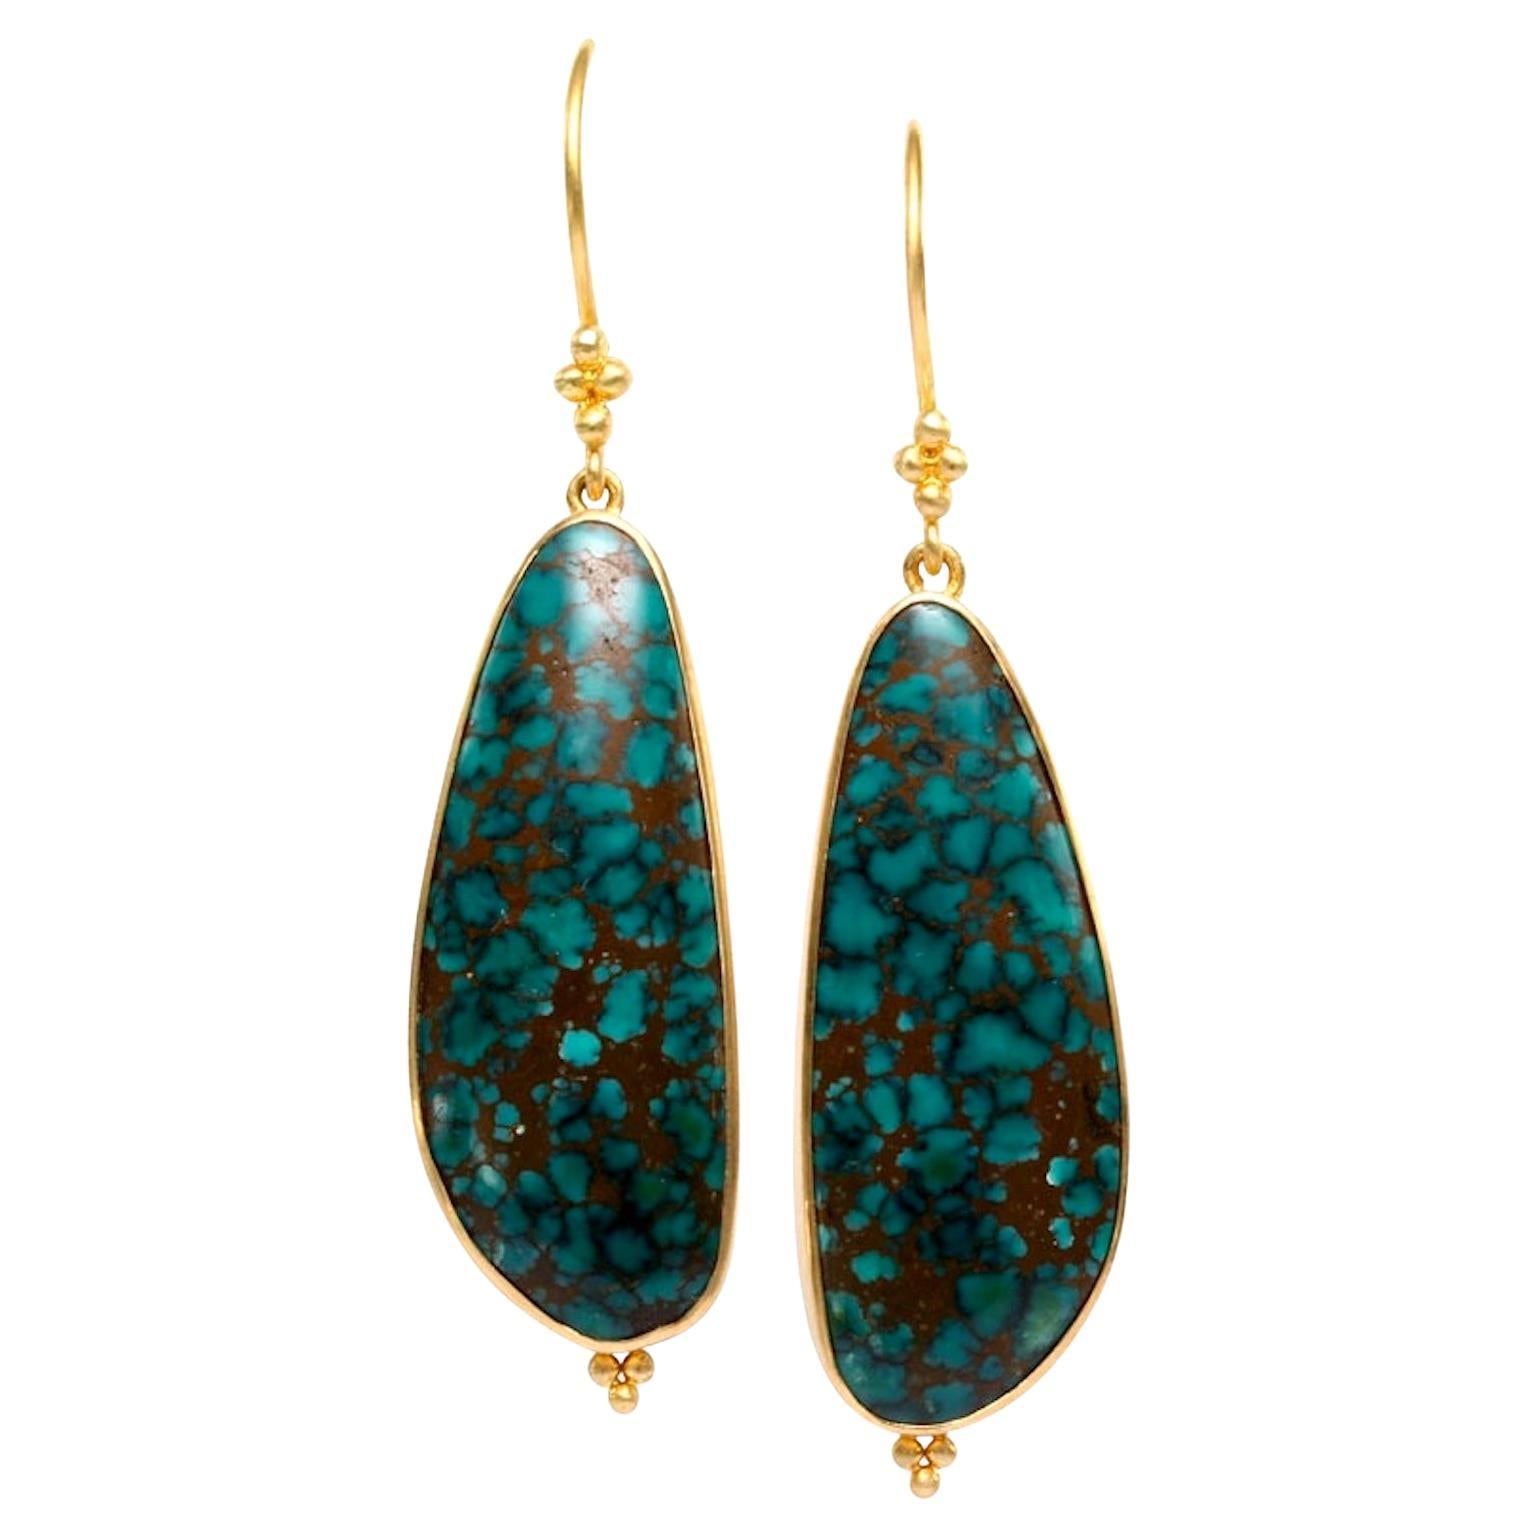 Steven Battelle 24.1 Carats Variegated Turquoise 18K Gold Wire Earrings